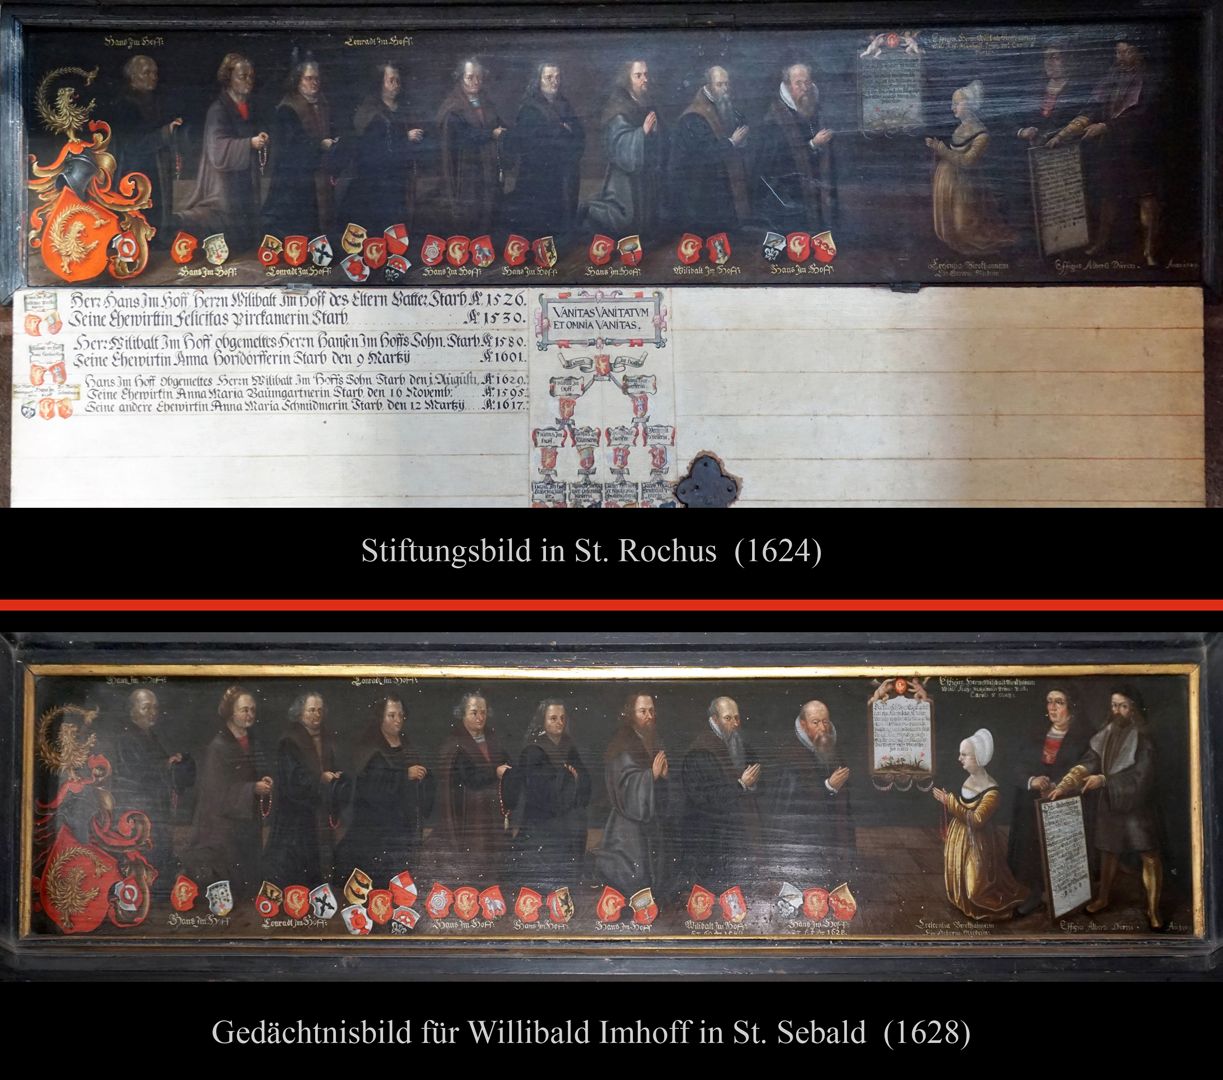 MemoriaL tablet for Willibald Imhoff comparison picture